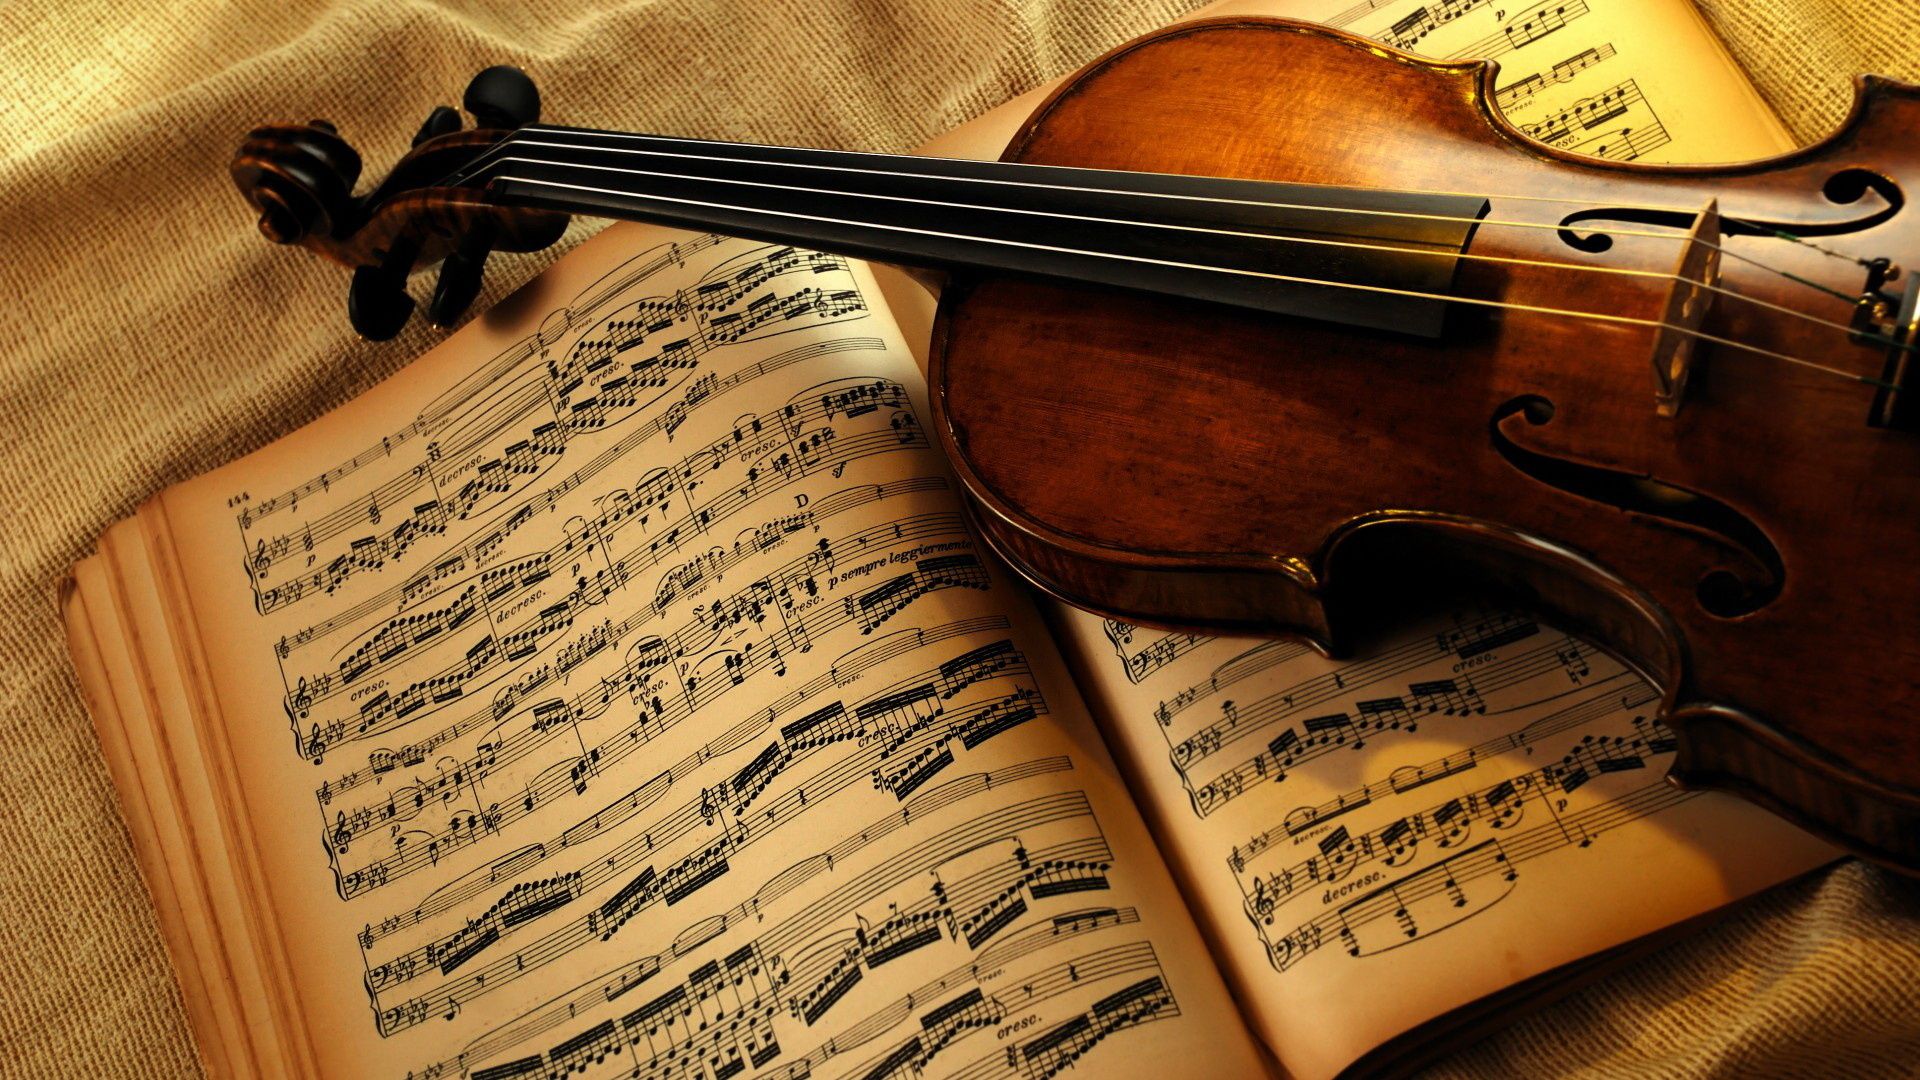 musical instruments violin wood classical music classic viola instrument music symphony violinist orchestra bowed stringed instrument harmony antique musician note old cello chamber offense